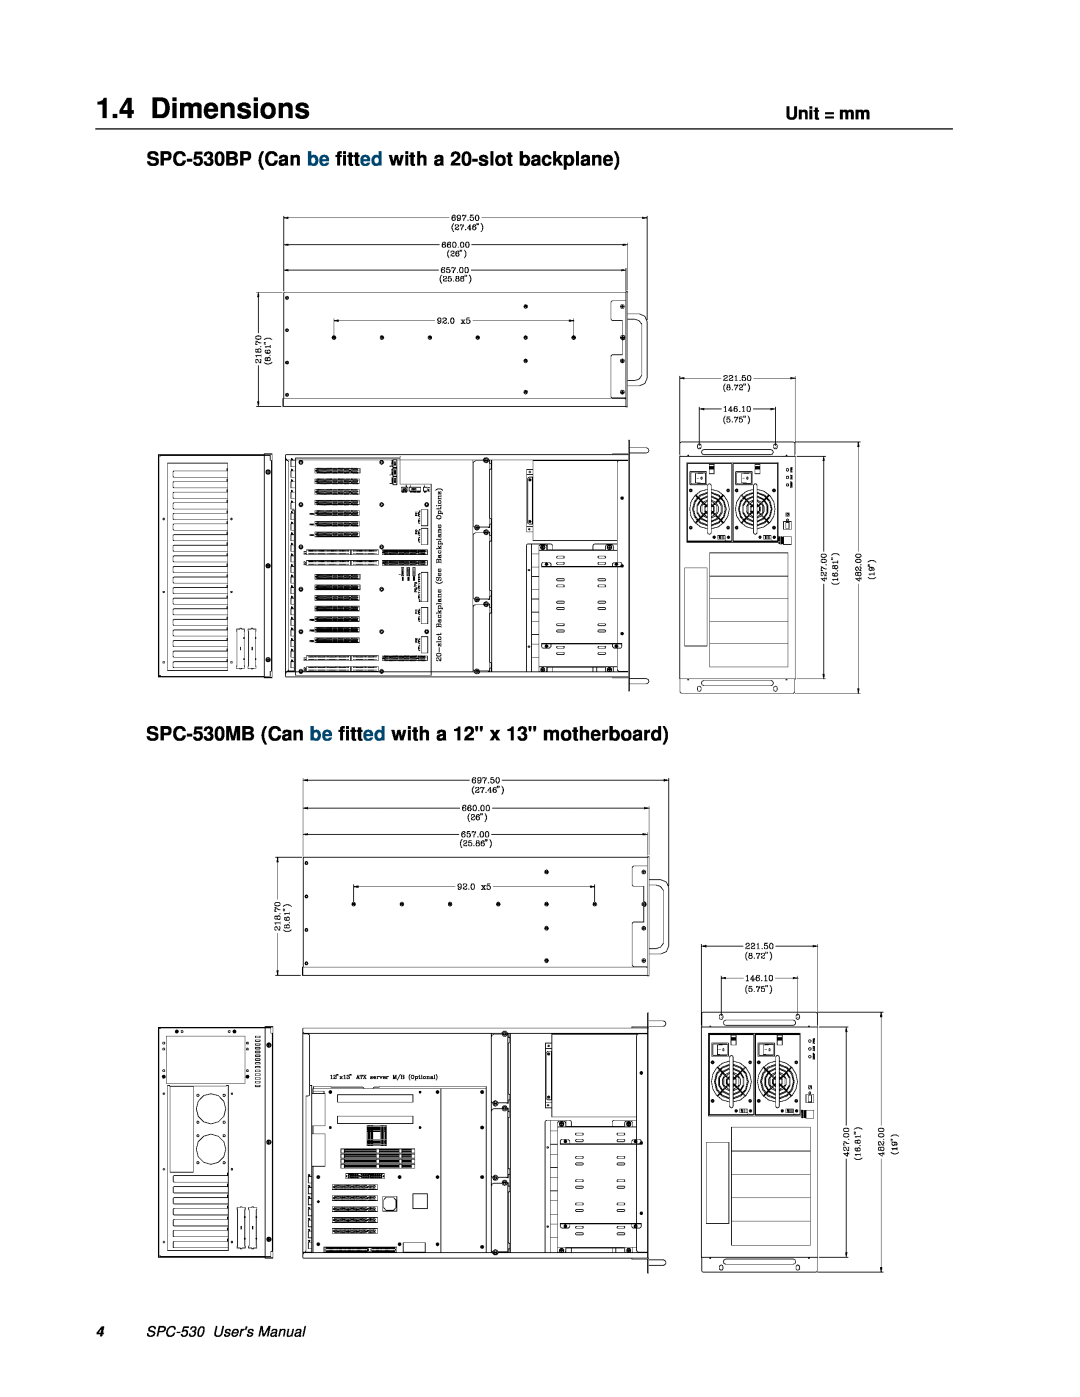 Advantech user manual Dimensions, SPC-530BP Can be fitted with a 20-slot backplane, Unit = mm, SPC-530 Users Manual 